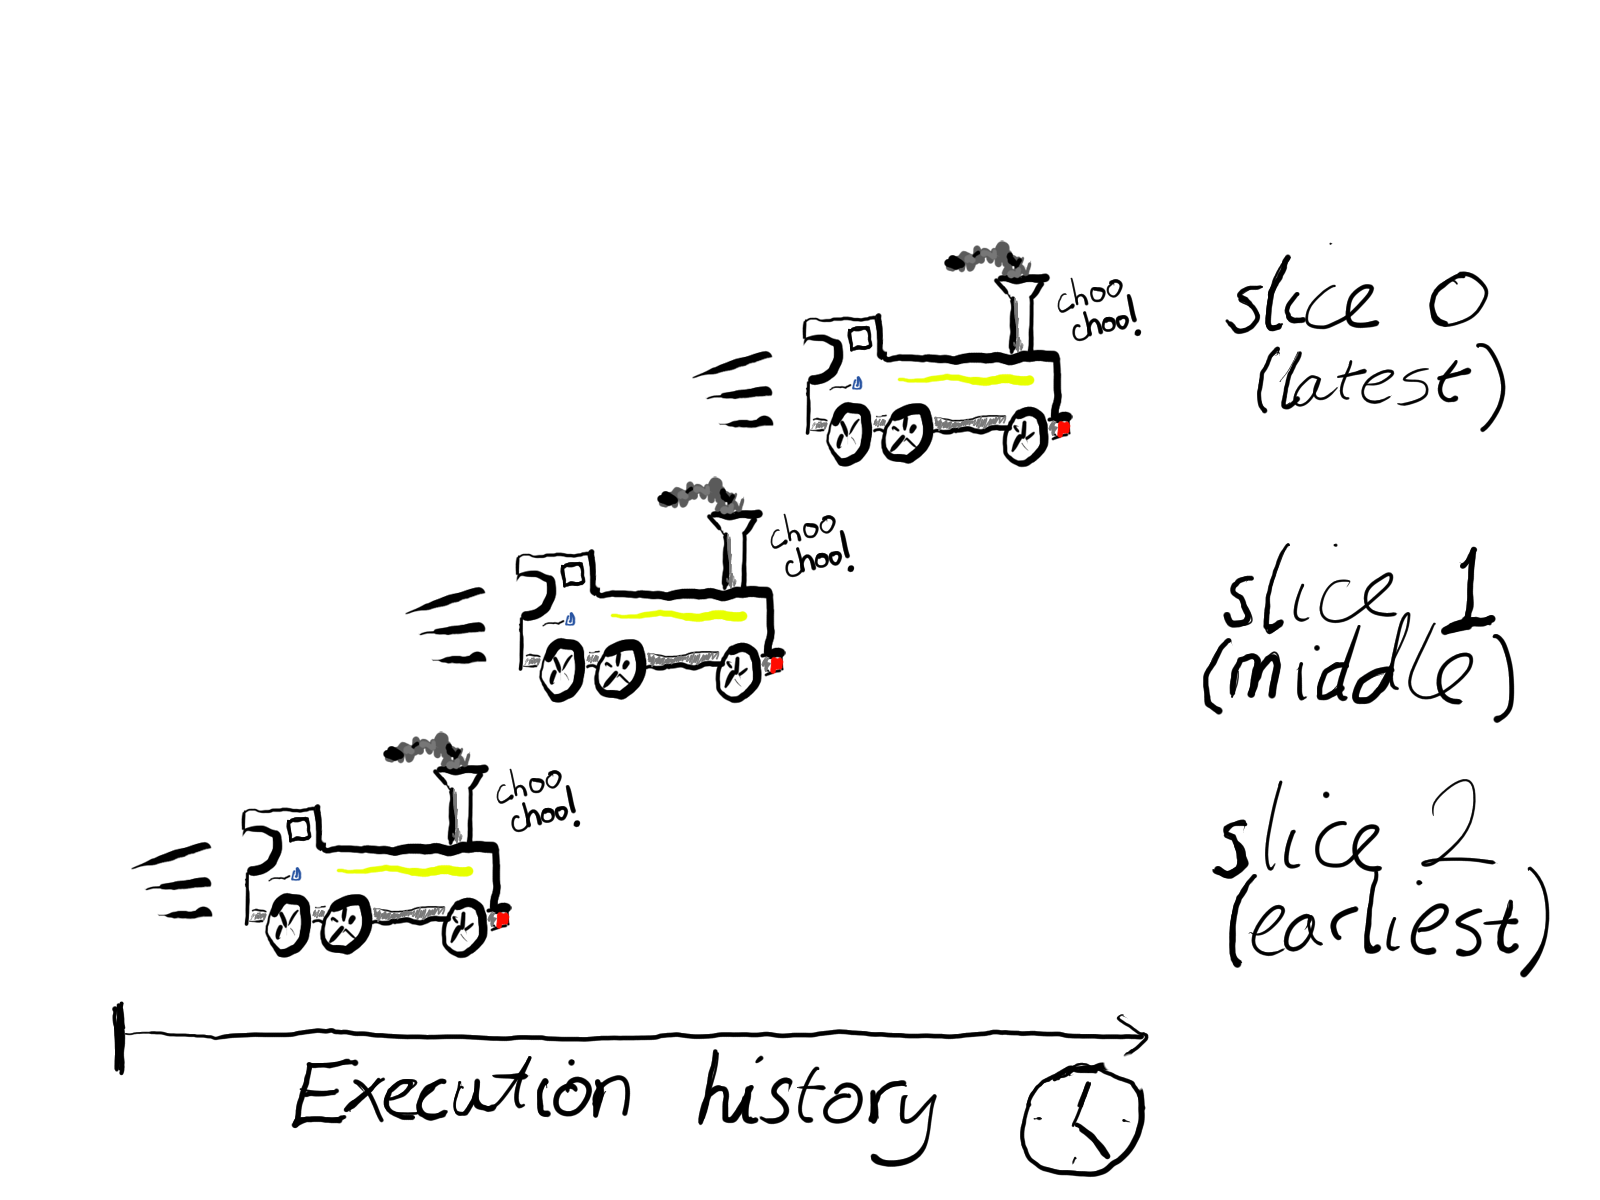 Parallel Search Article - multiple slices of execution history in parallel